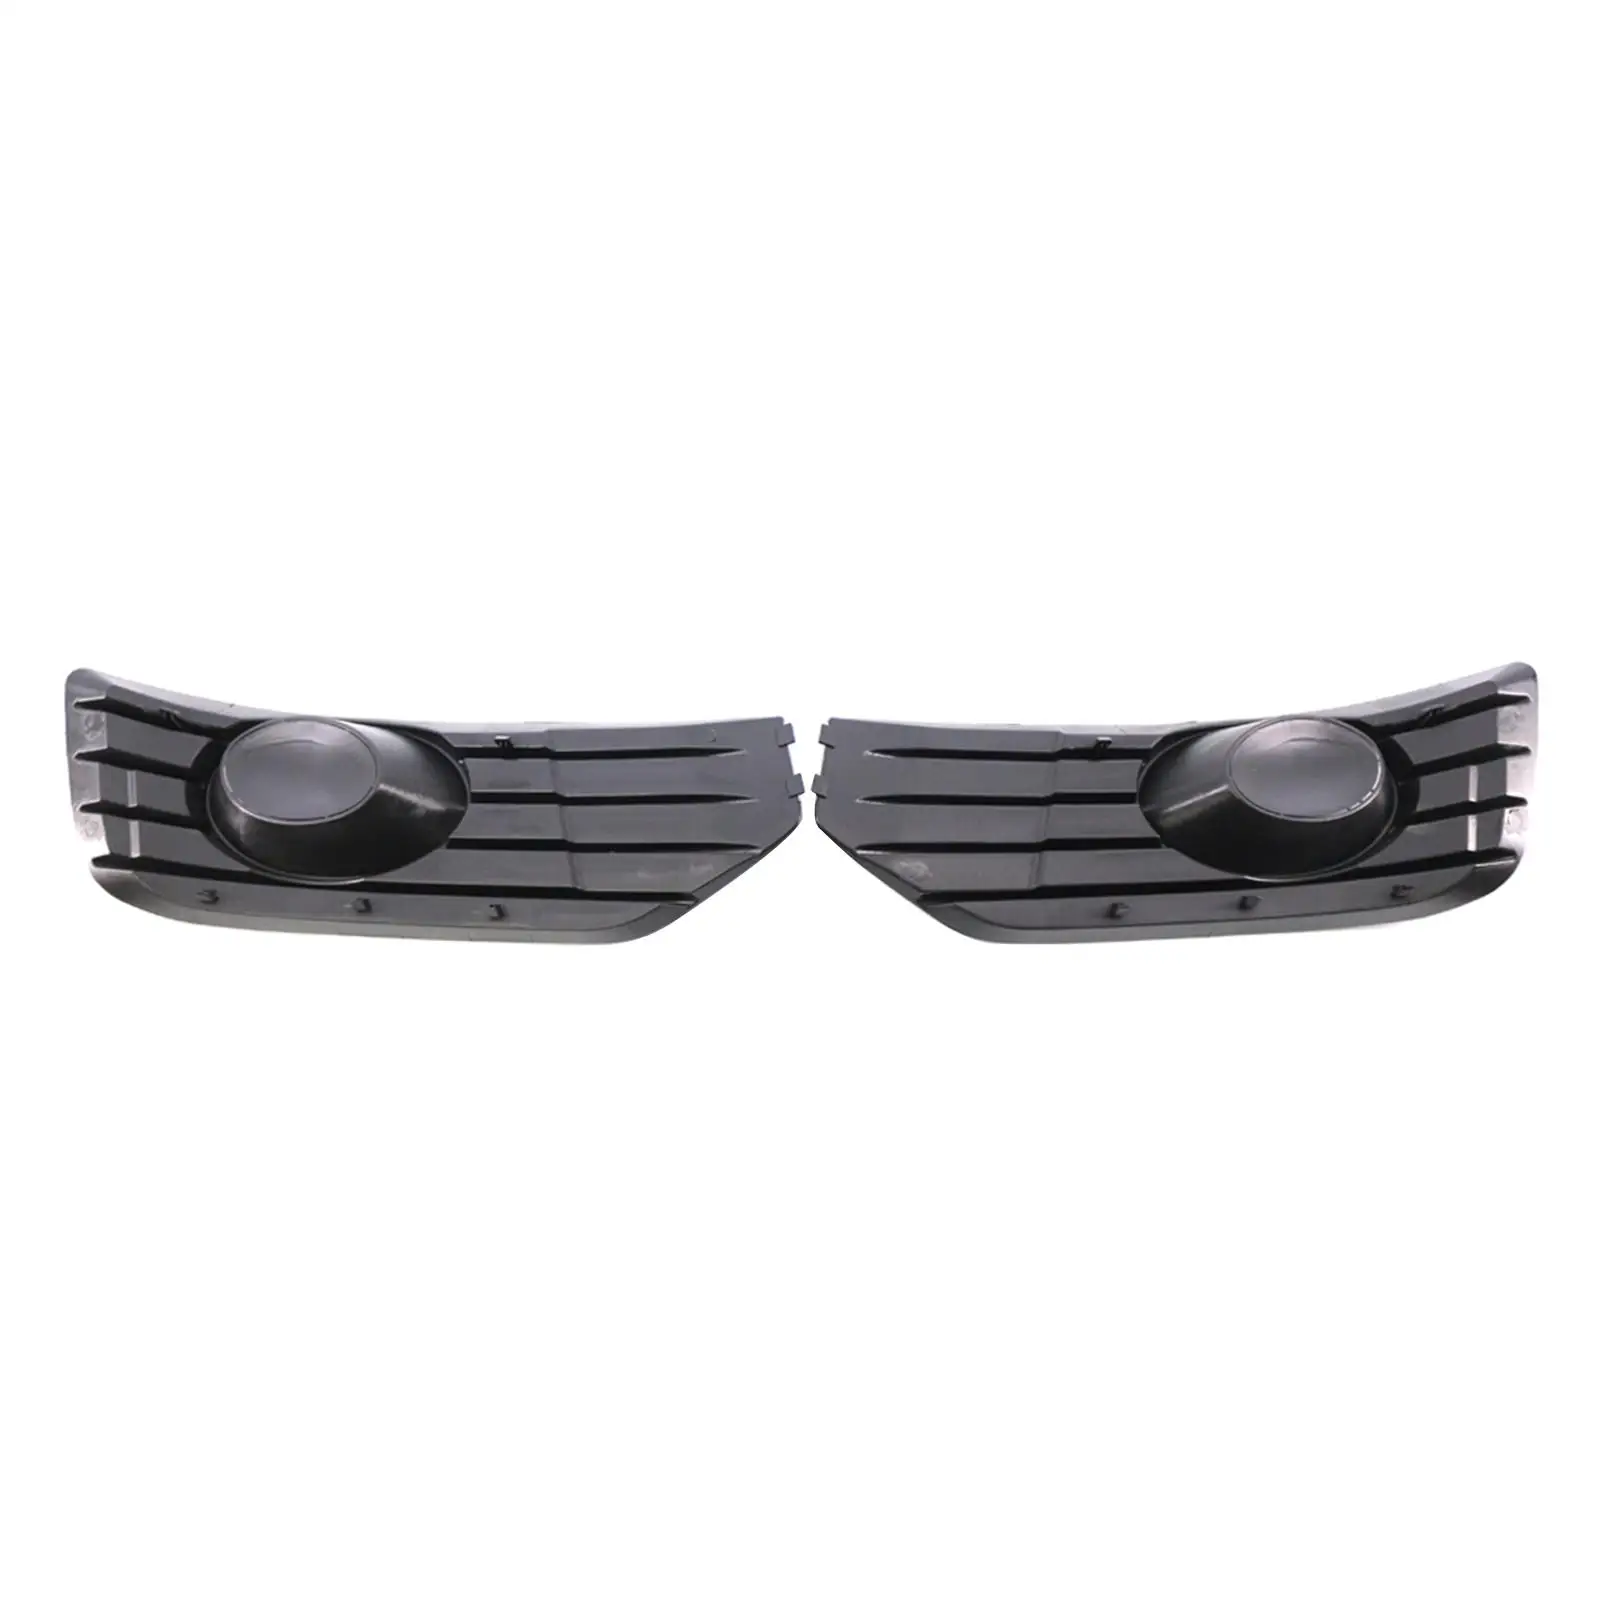 1 Pair Front Fog Light Covers Foglight Covers with Insert Grille Exterior Trims